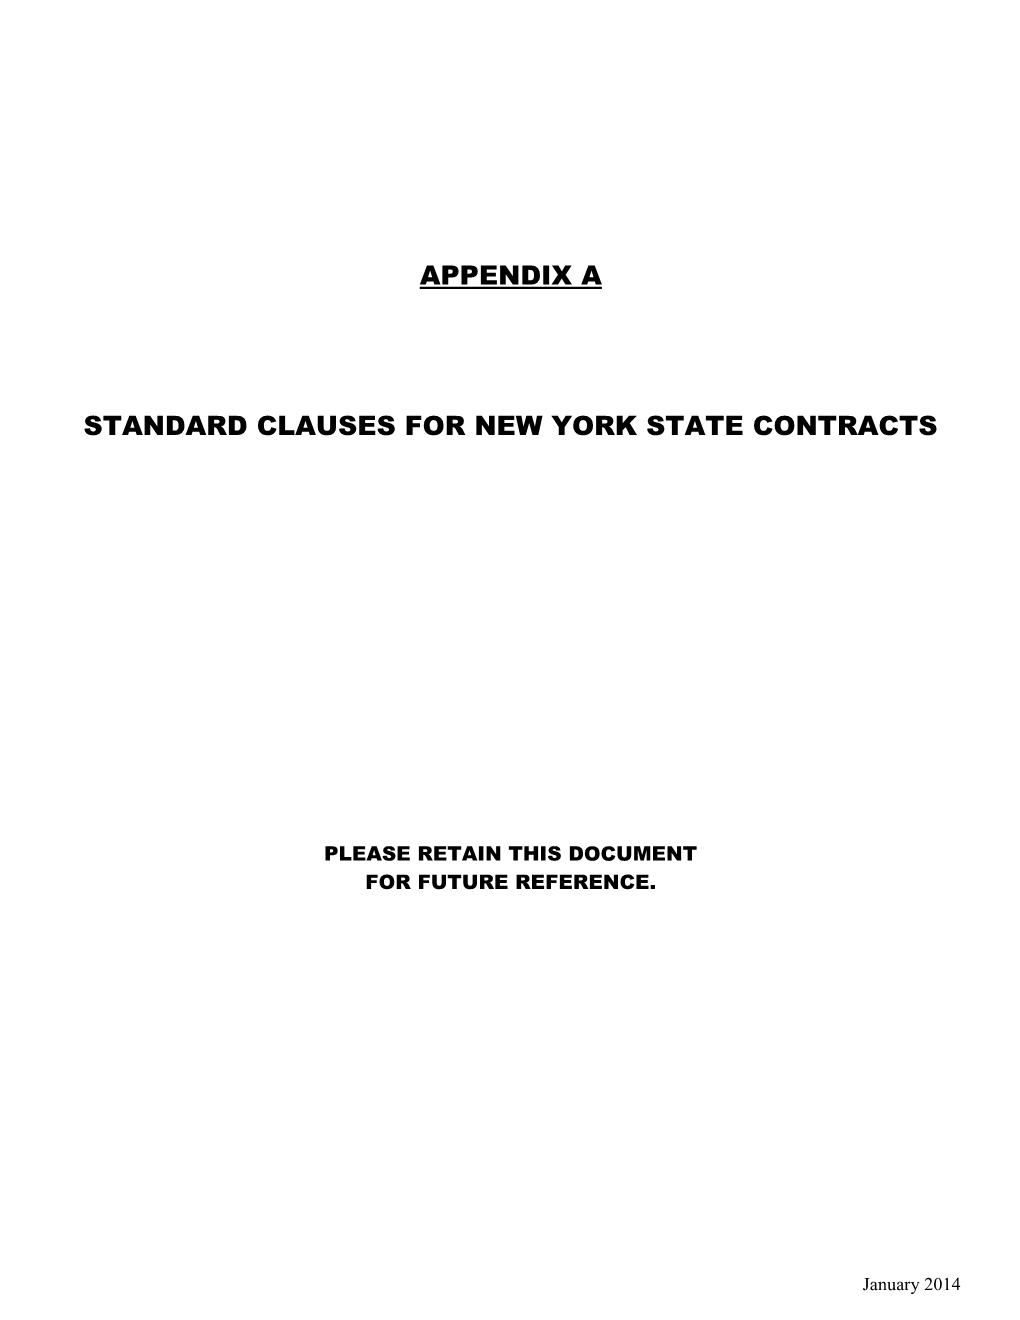 Appendix a - Standard Clauses for NYS Contracts